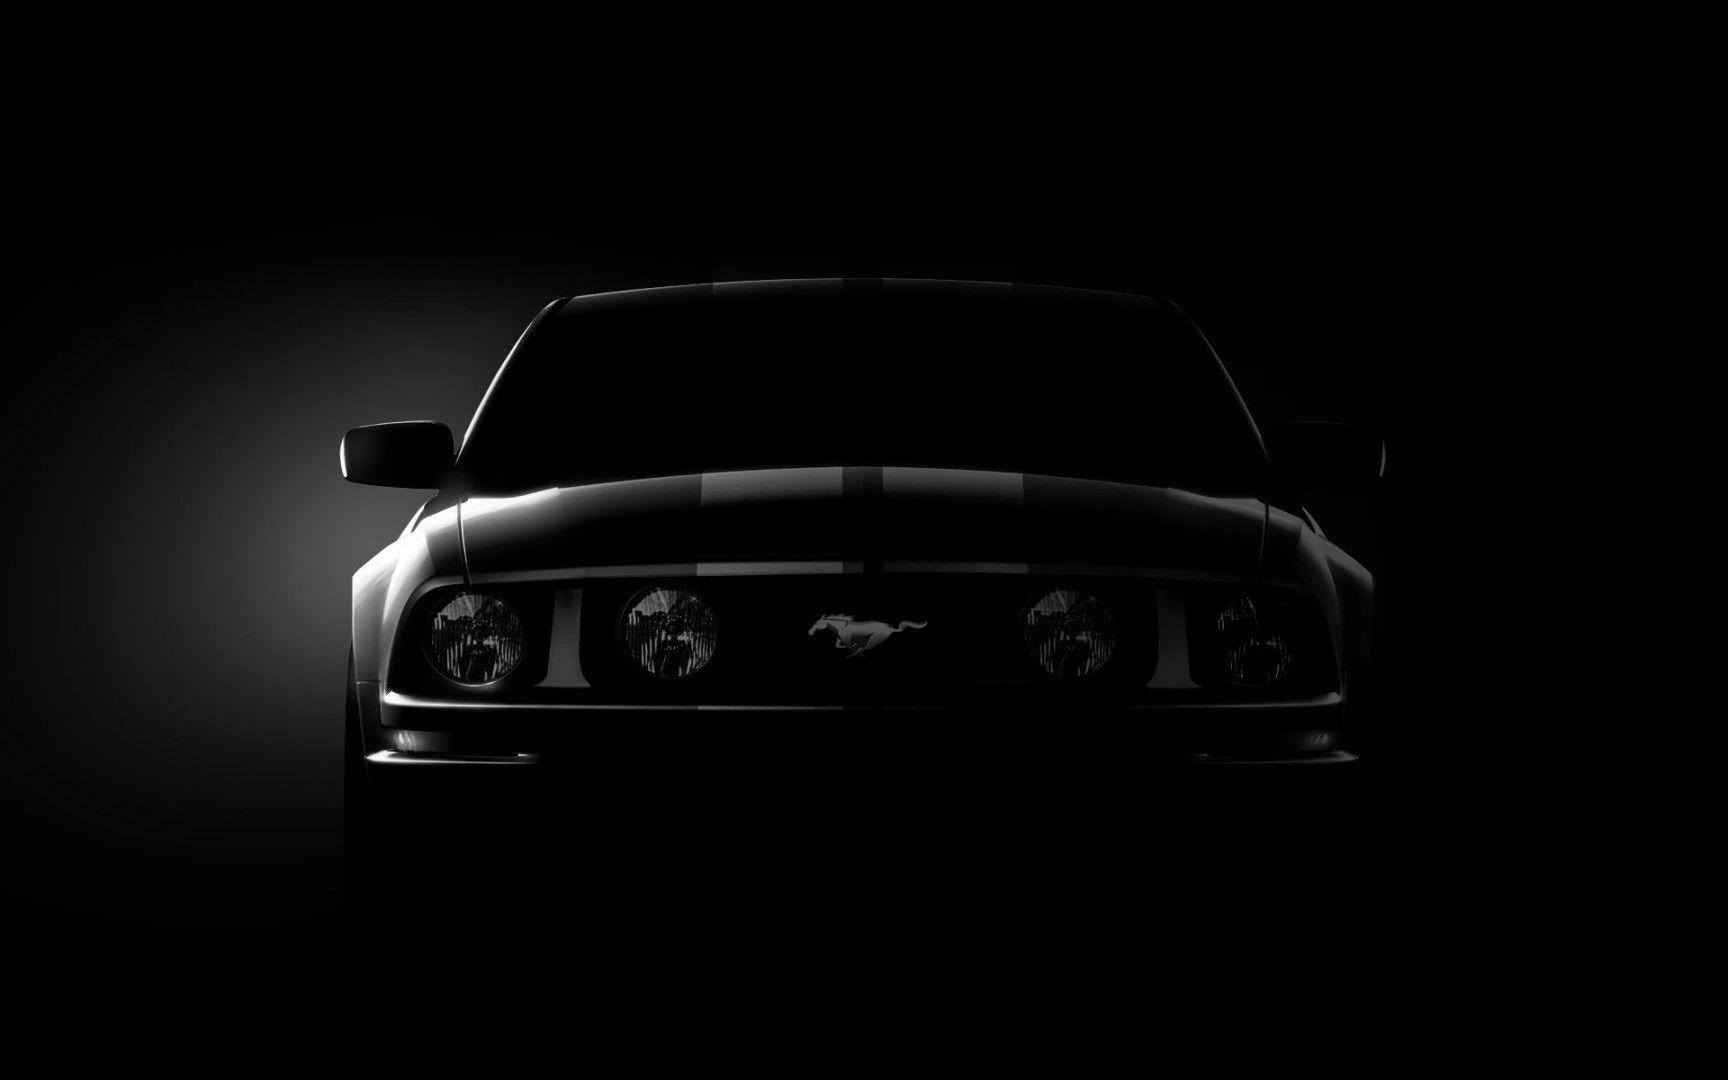 Ford Mustang Black Background Wallpaper. Muscle car. Ford mustang